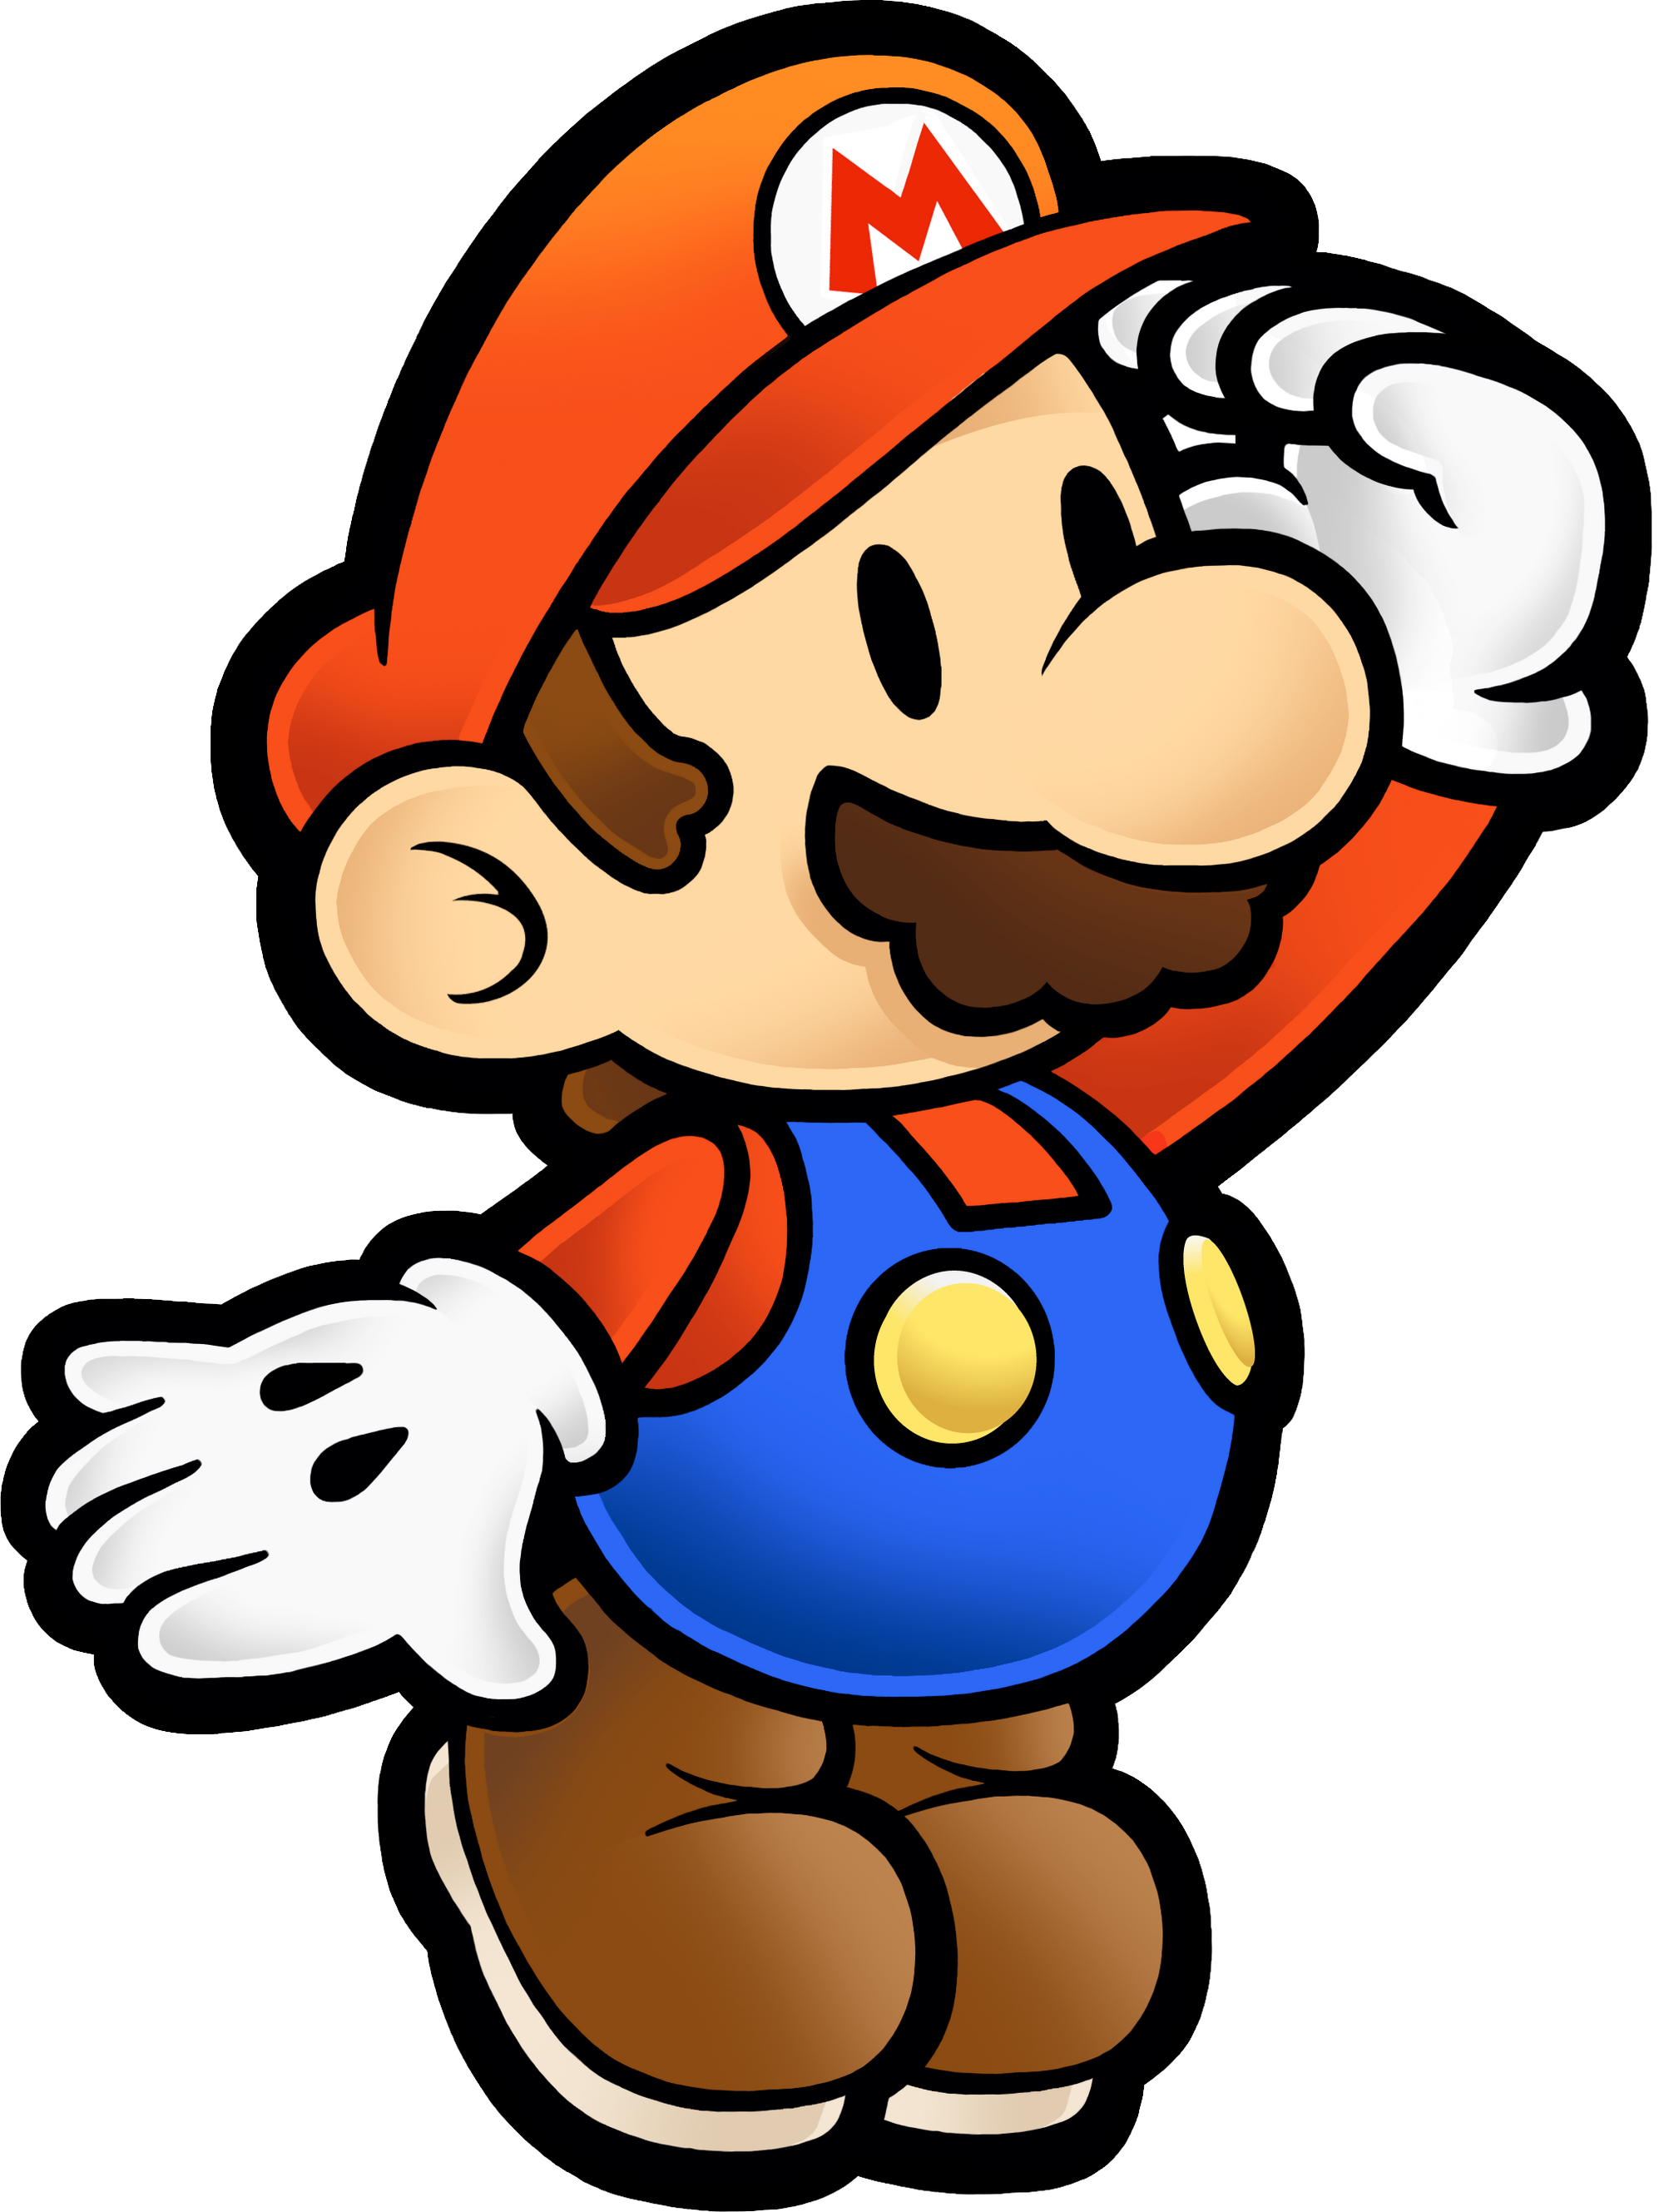 image-paper-mario-look-up-png-supermarioglitchy4-wiki-fandom-powered-by-wikia